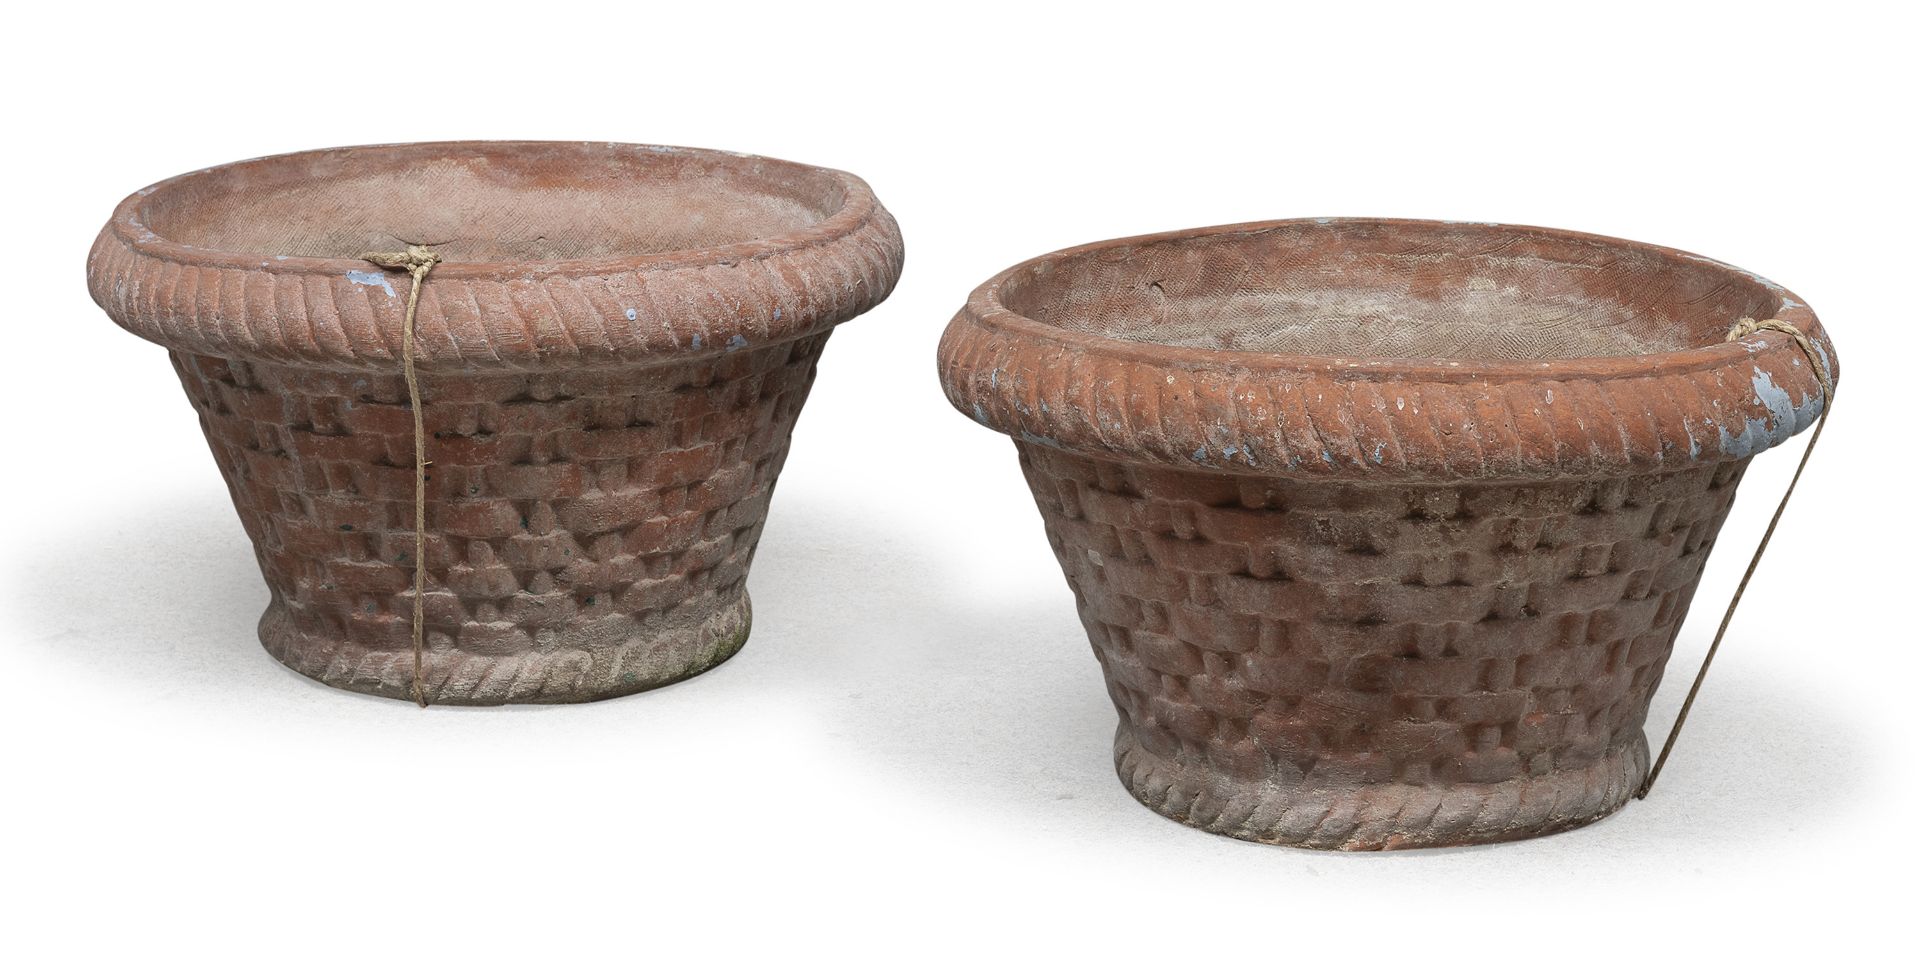 TWO TERRACOTTA GARDEN CACHEPOTS EARLY 20TH CENTURY